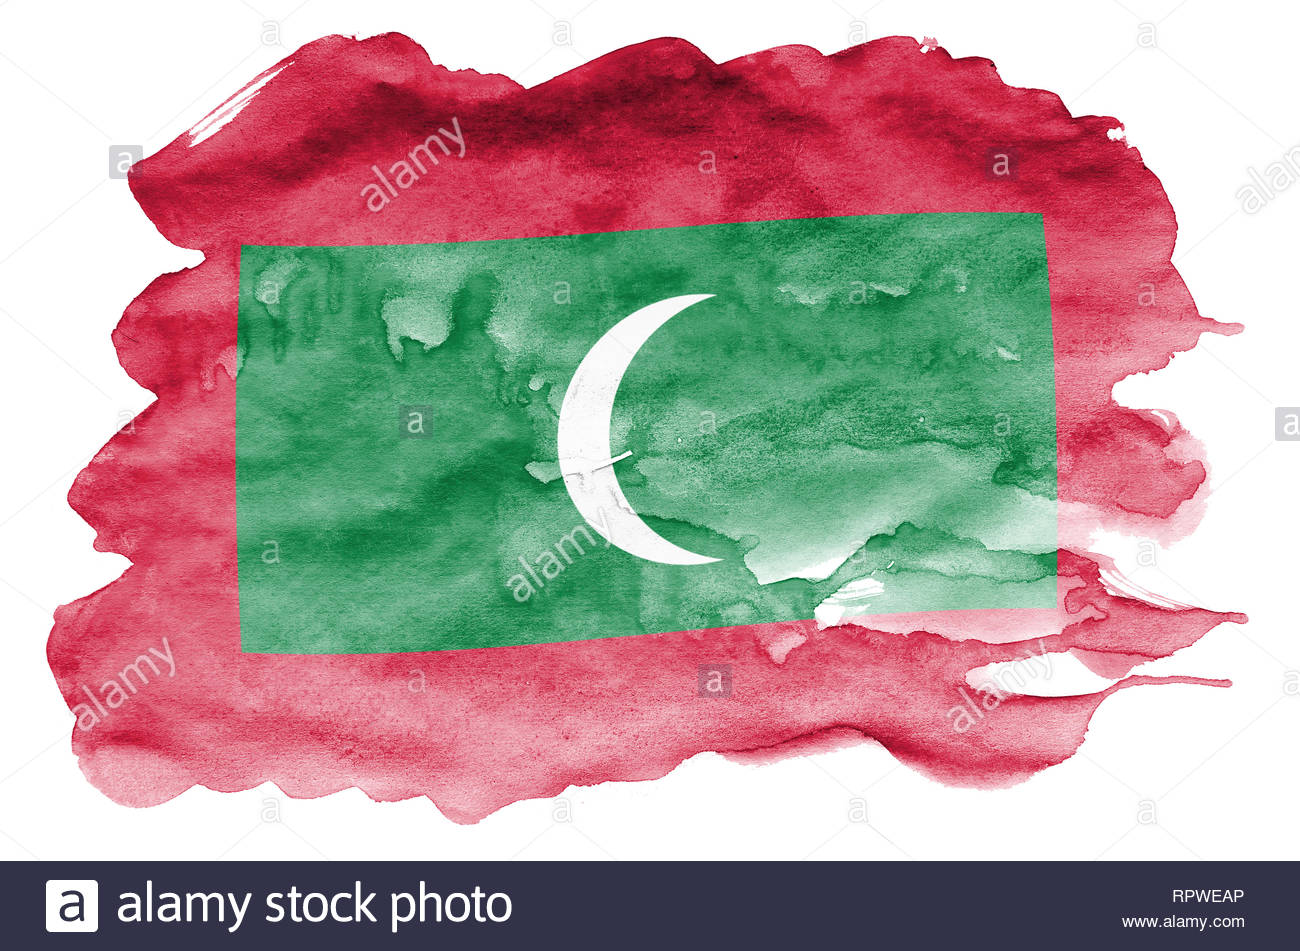 Maldives Cut Out Stock Image Pictures